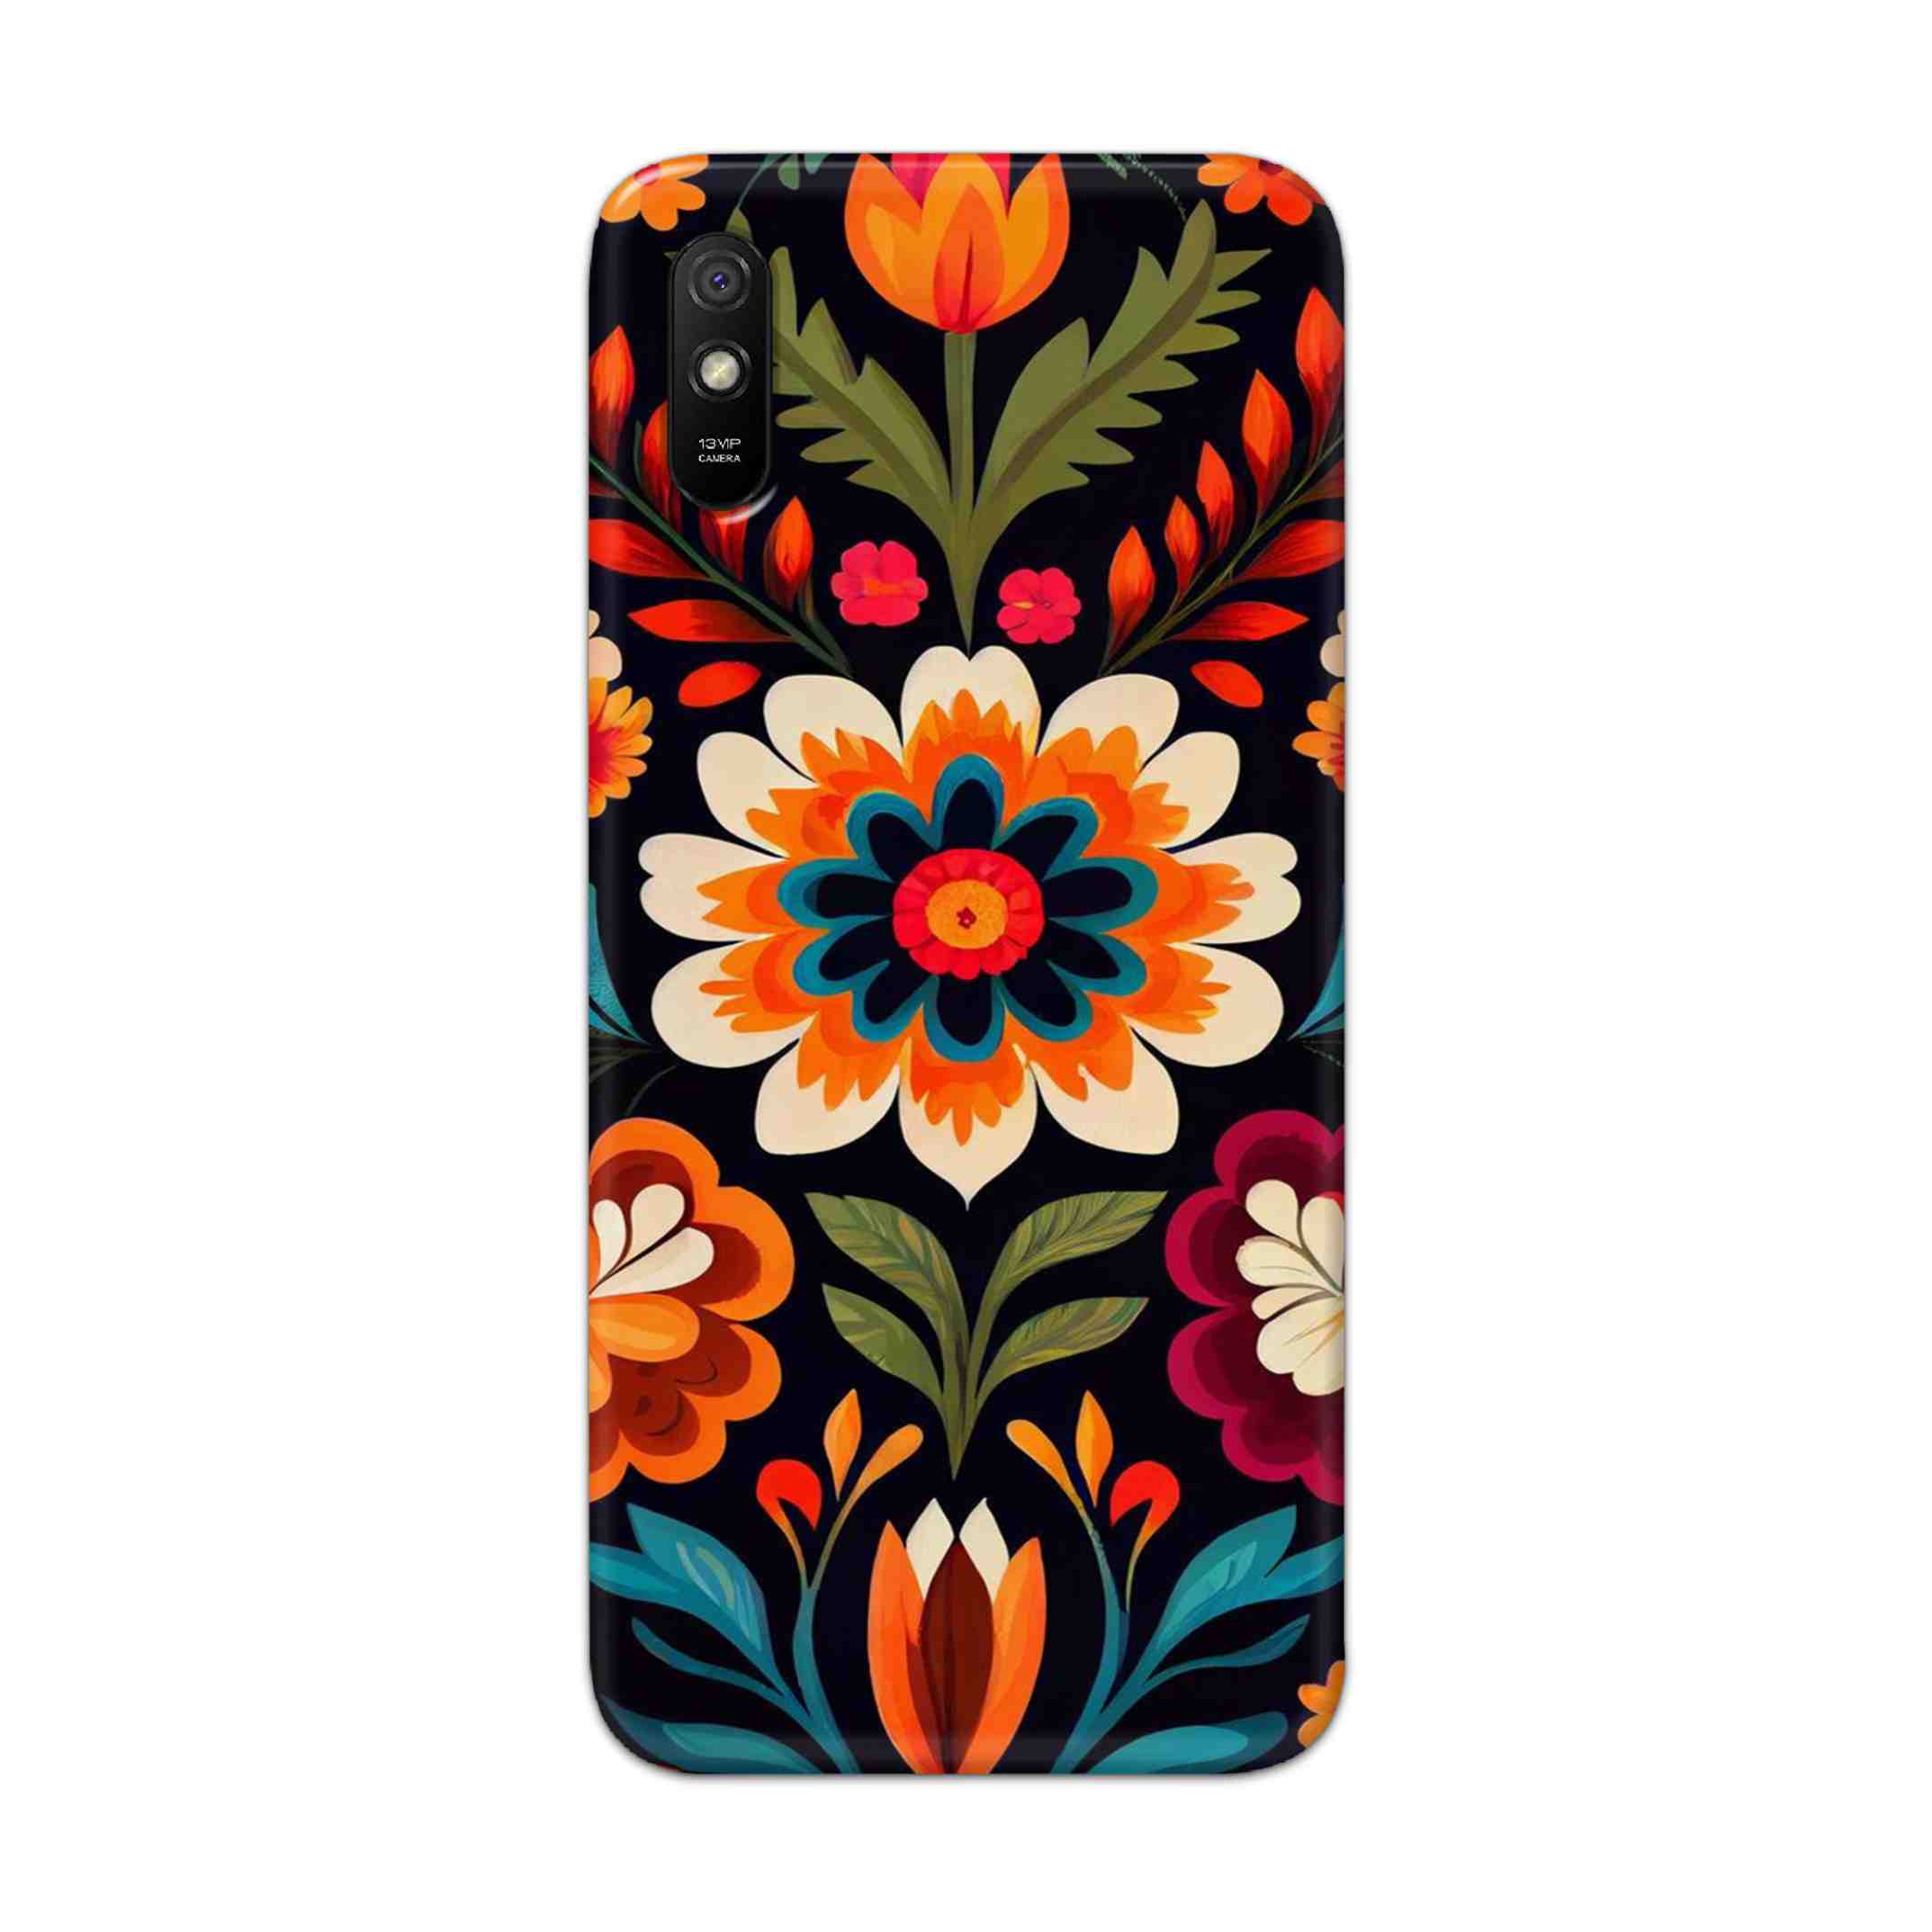 Buy Flower Hard Back Mobile Phone Case Cover For Redmi 9A Online